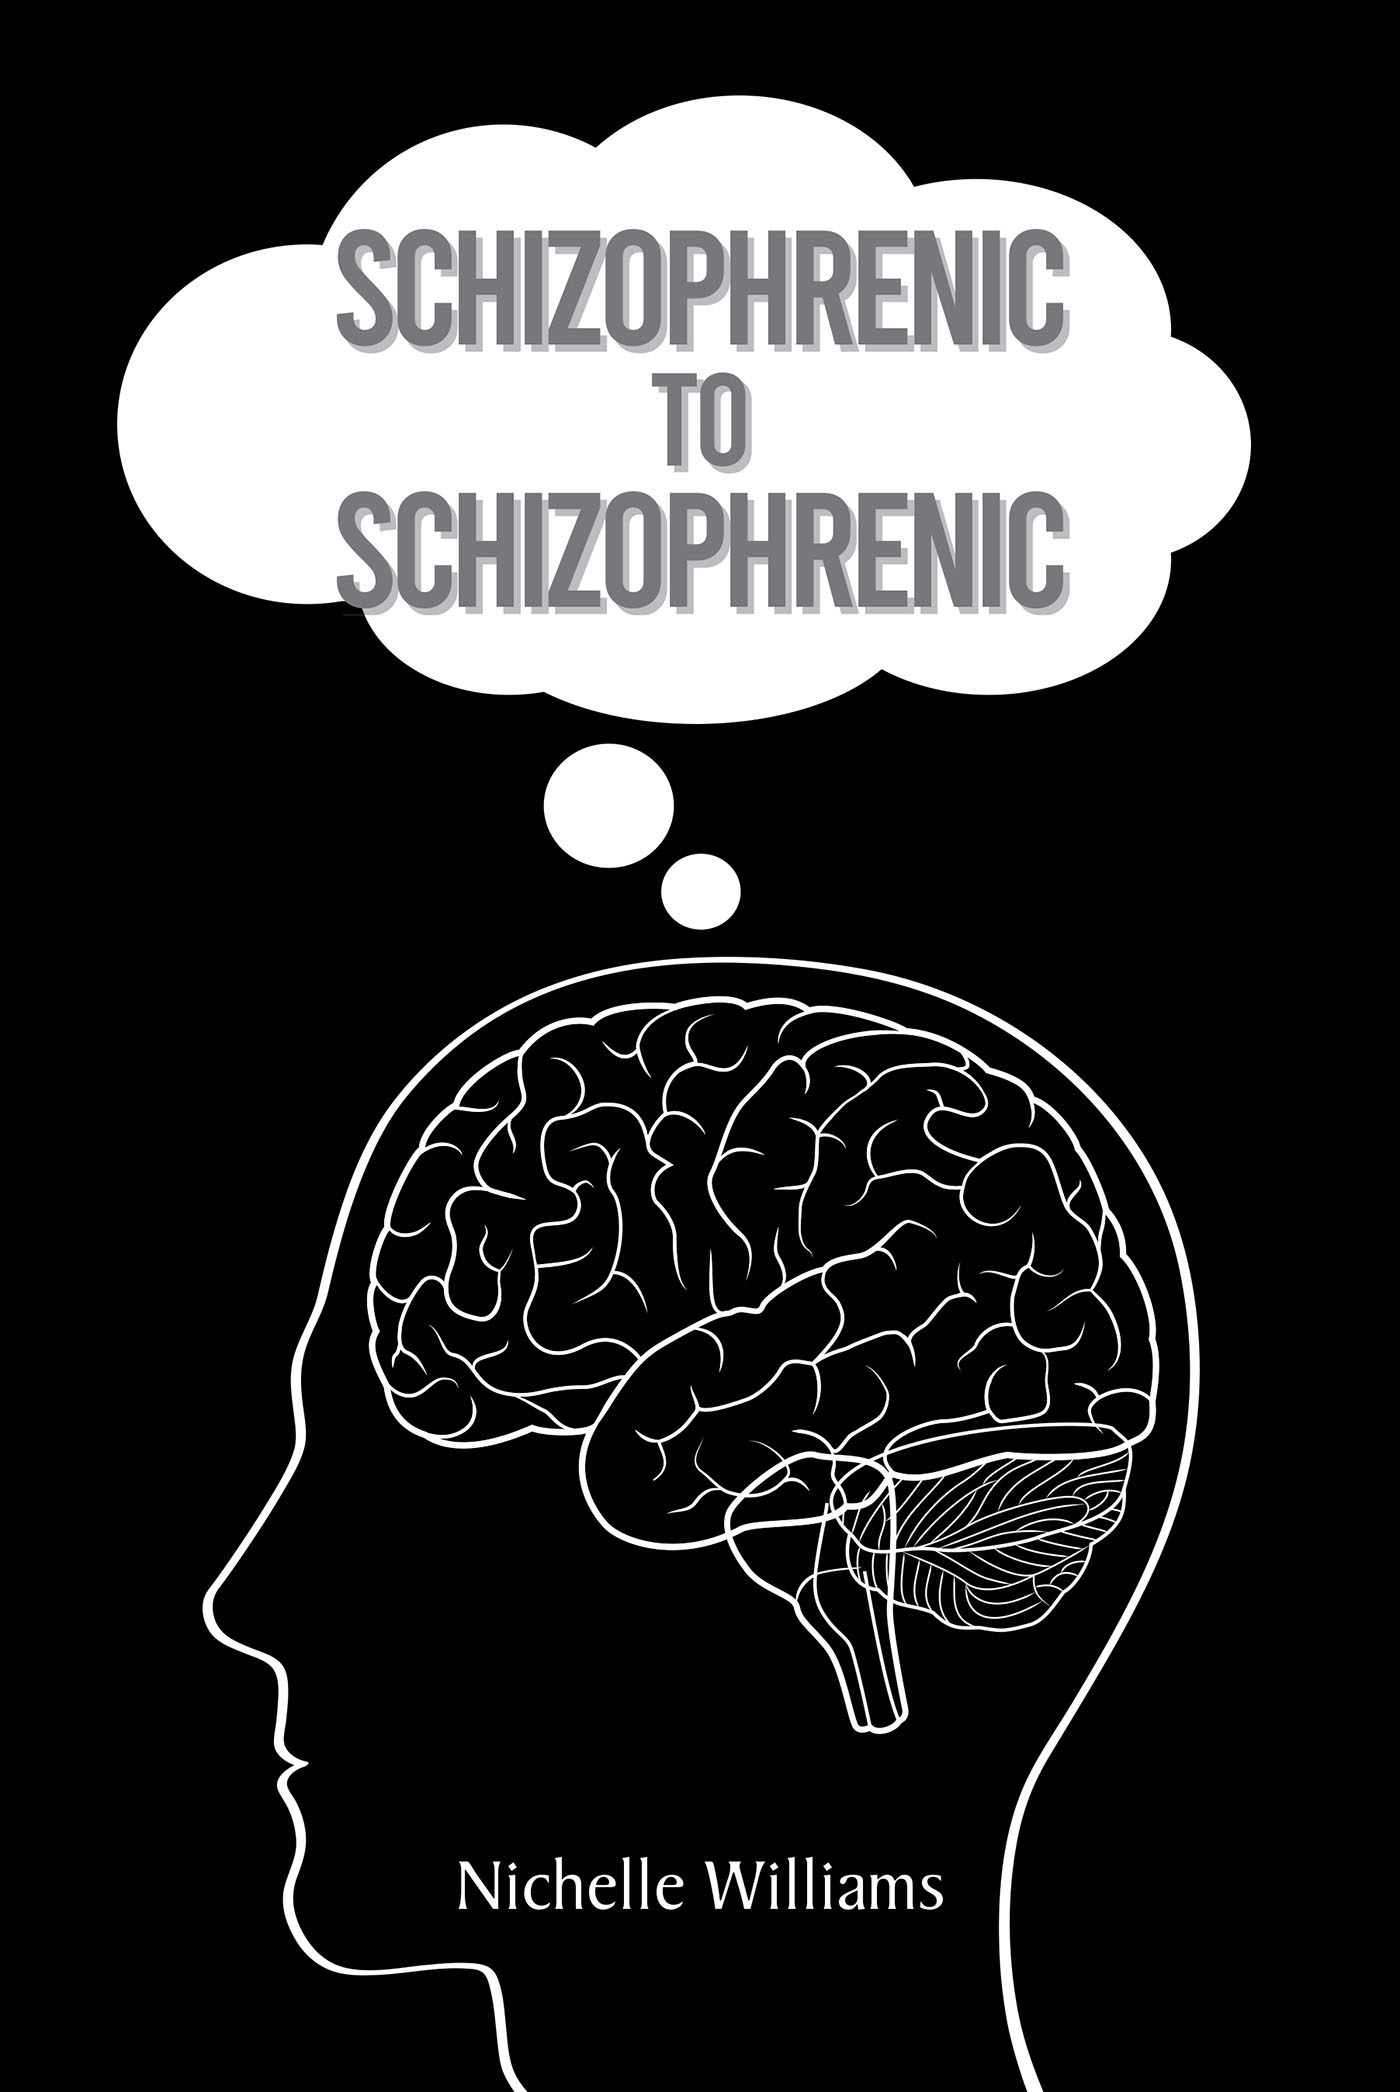 Nichelle Williams’s Newly Released "Schizophrenic to Schizophrenic" is a Compassionate and Insightful Exploration of Life with Schizophrenia